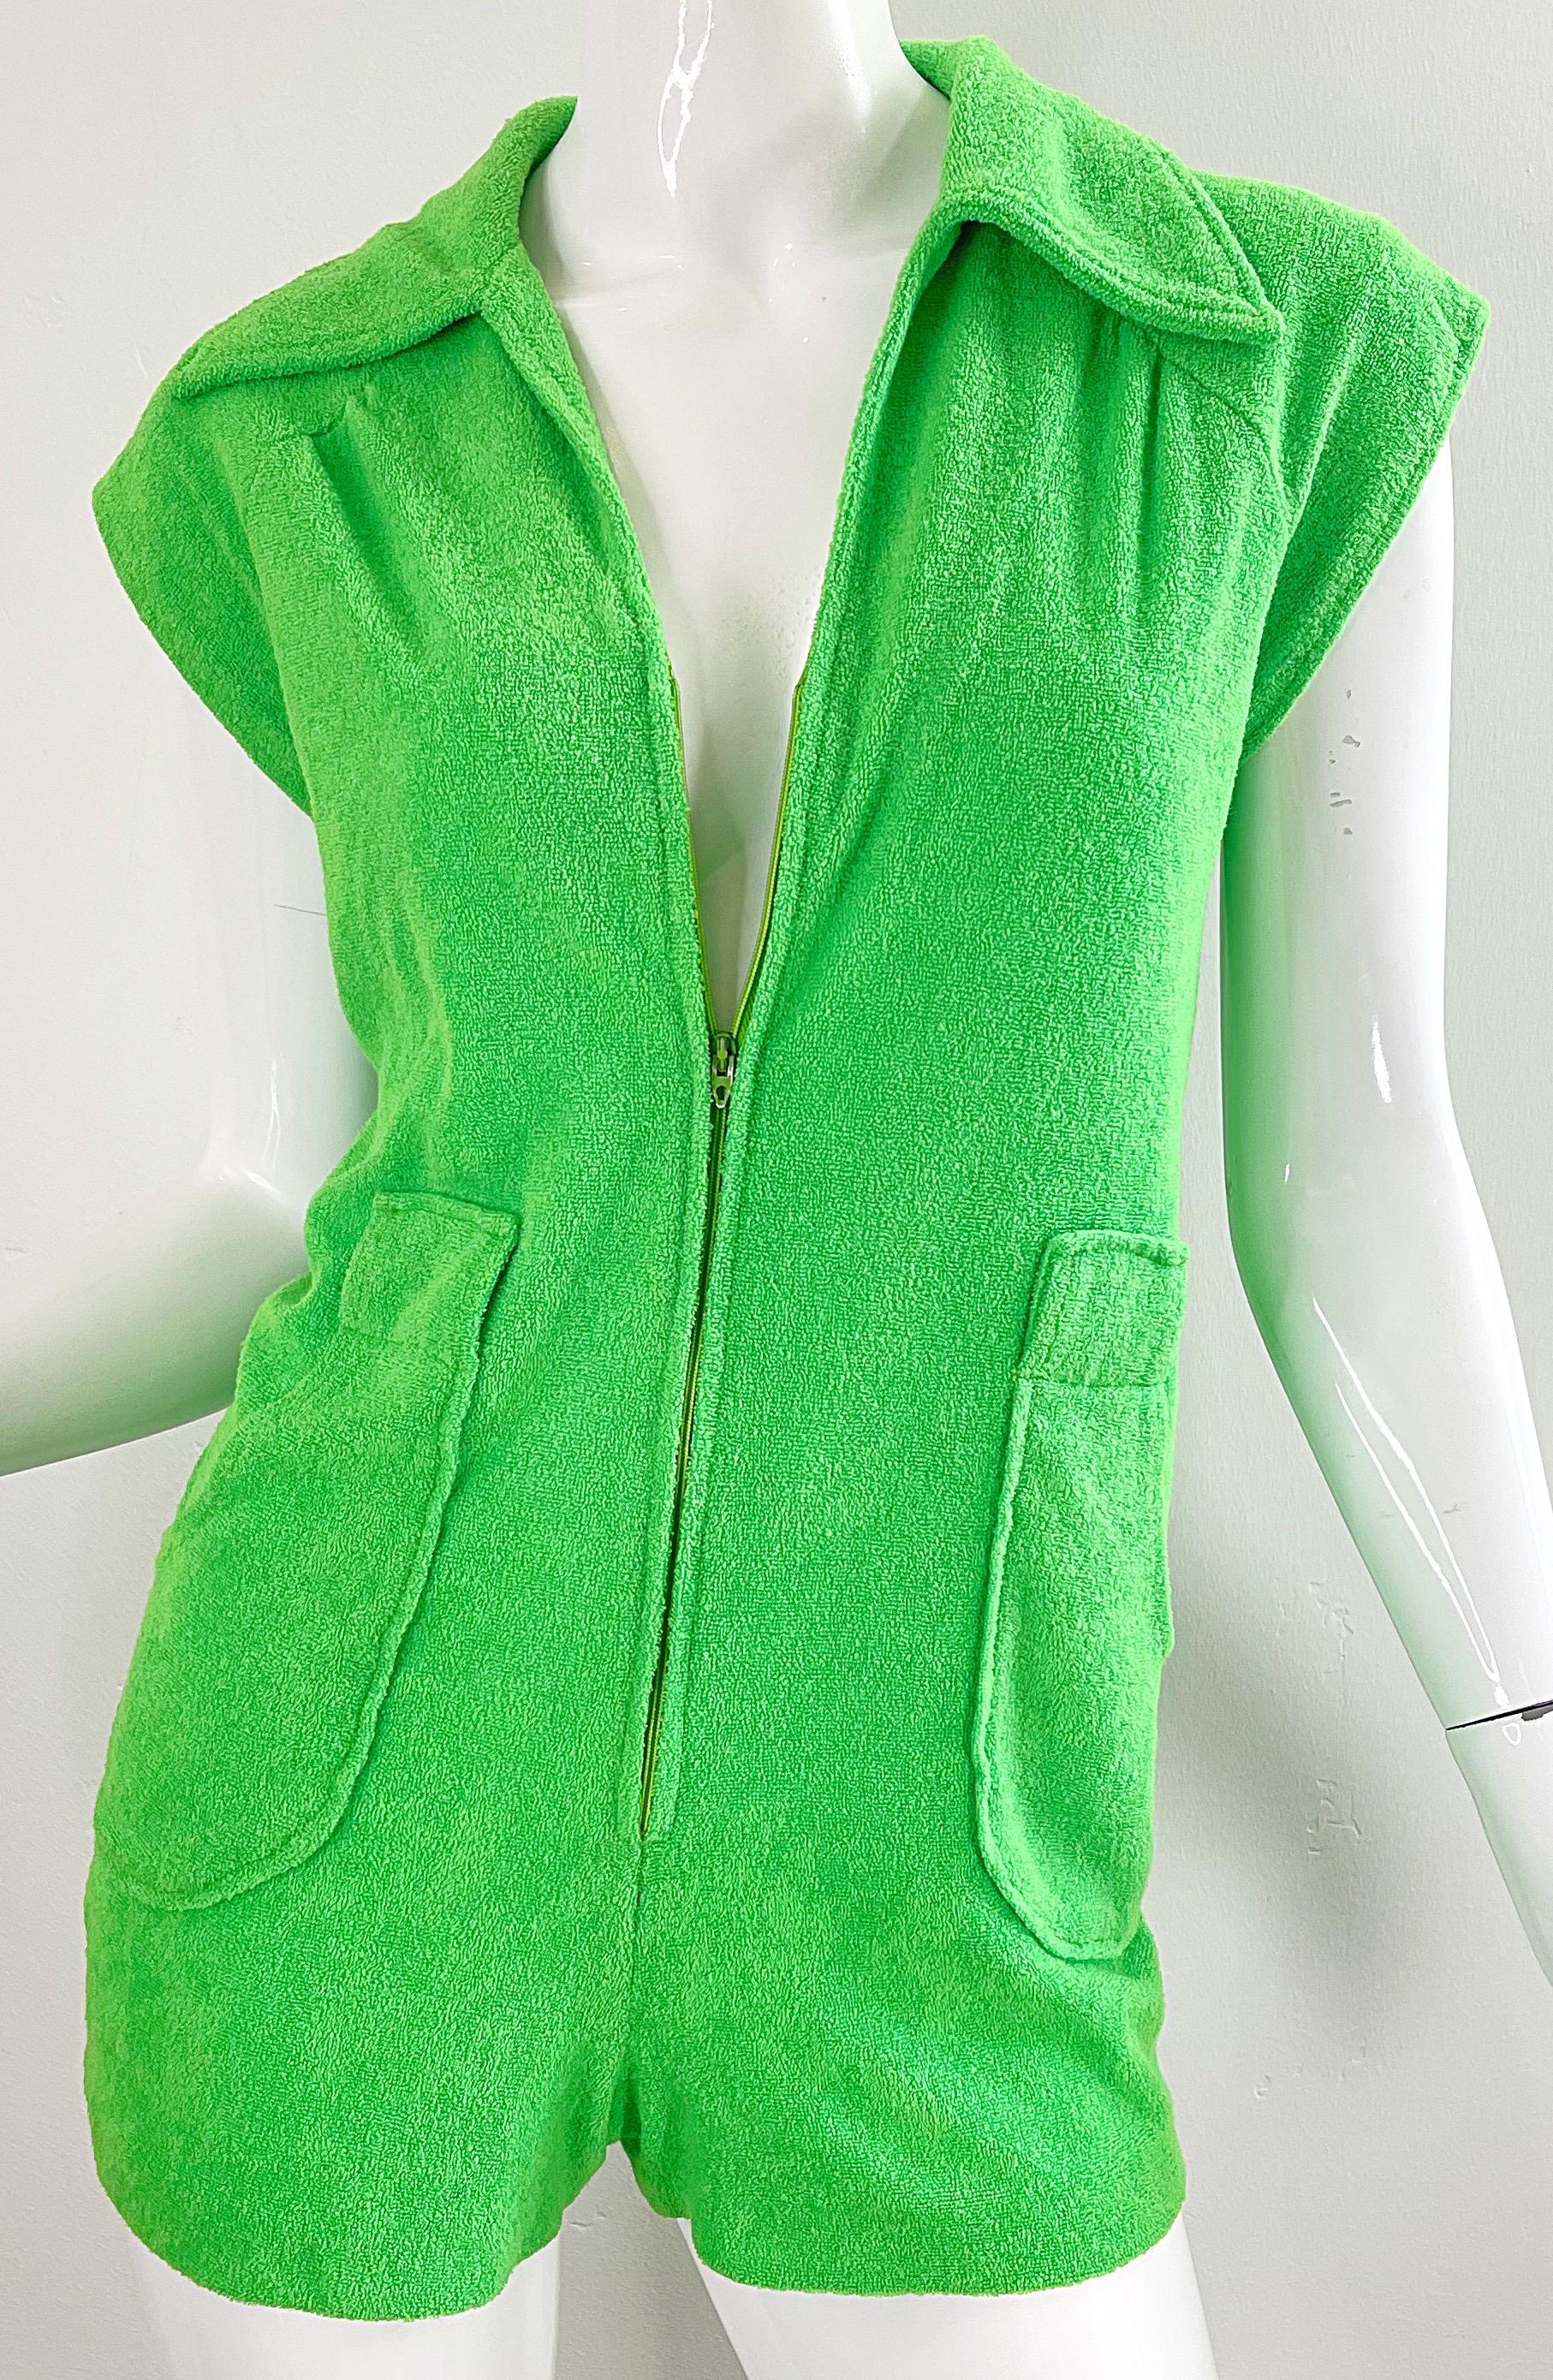 Amazing 1970s Terrycloth Neon Green Romper Vintage 70s Shorts Jumpsuit For Sale 7